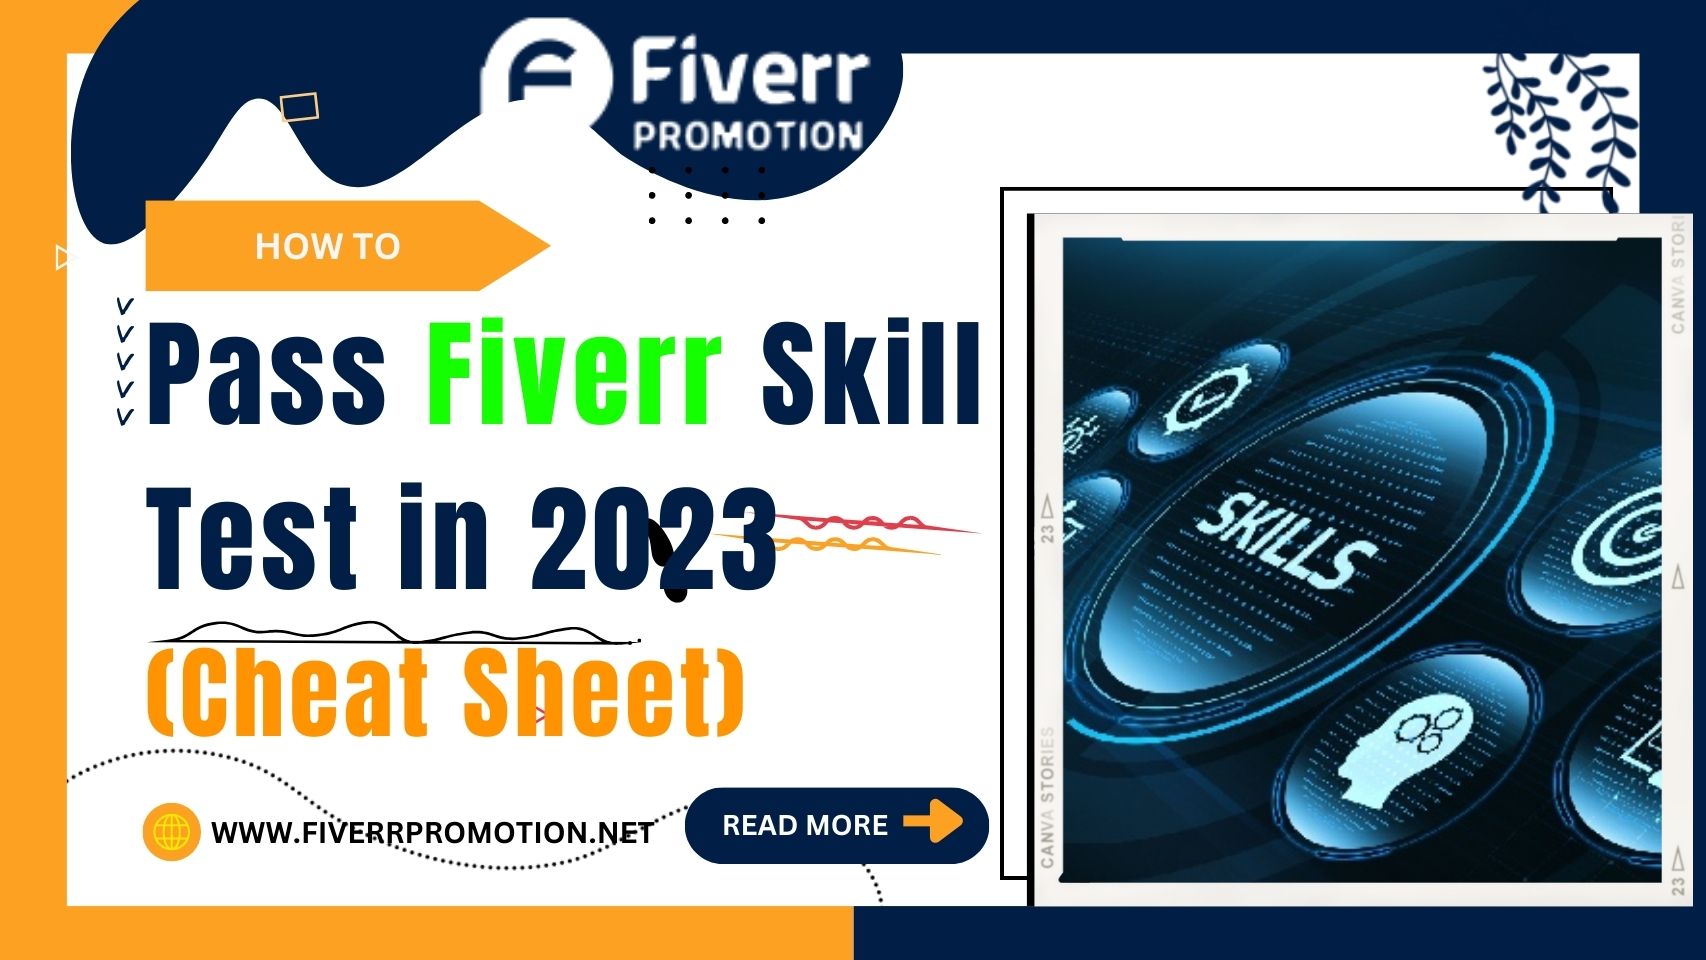 How to Pass Fiverr Skill Test in 2023(Cheat Sheet)